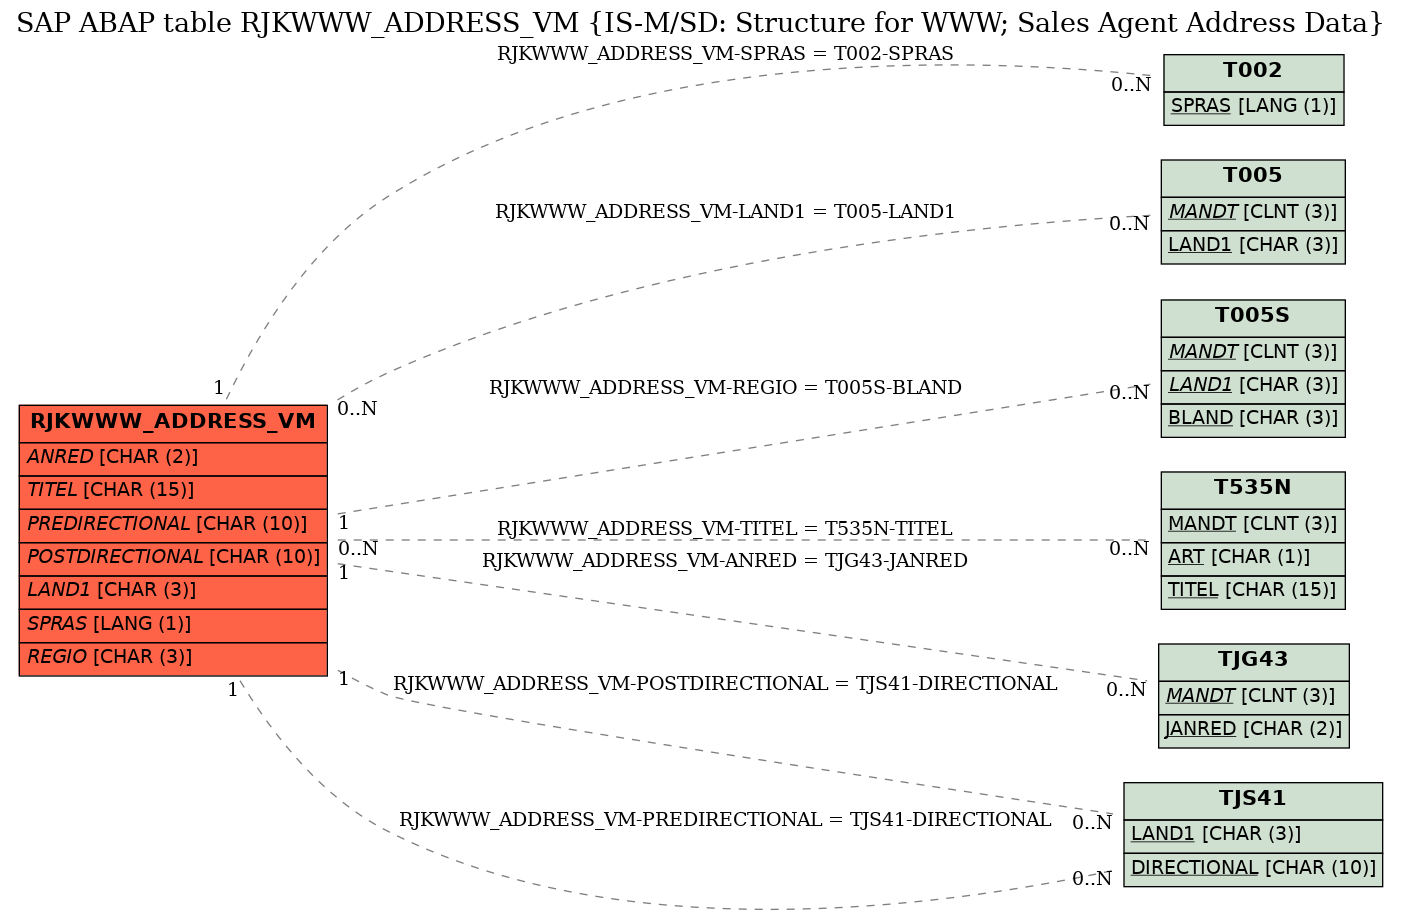 E-R Diagram for table RJKWWW_ADDRESS_VM (IS-M/SD: Structure for WWW; Sales Agent Address Data)